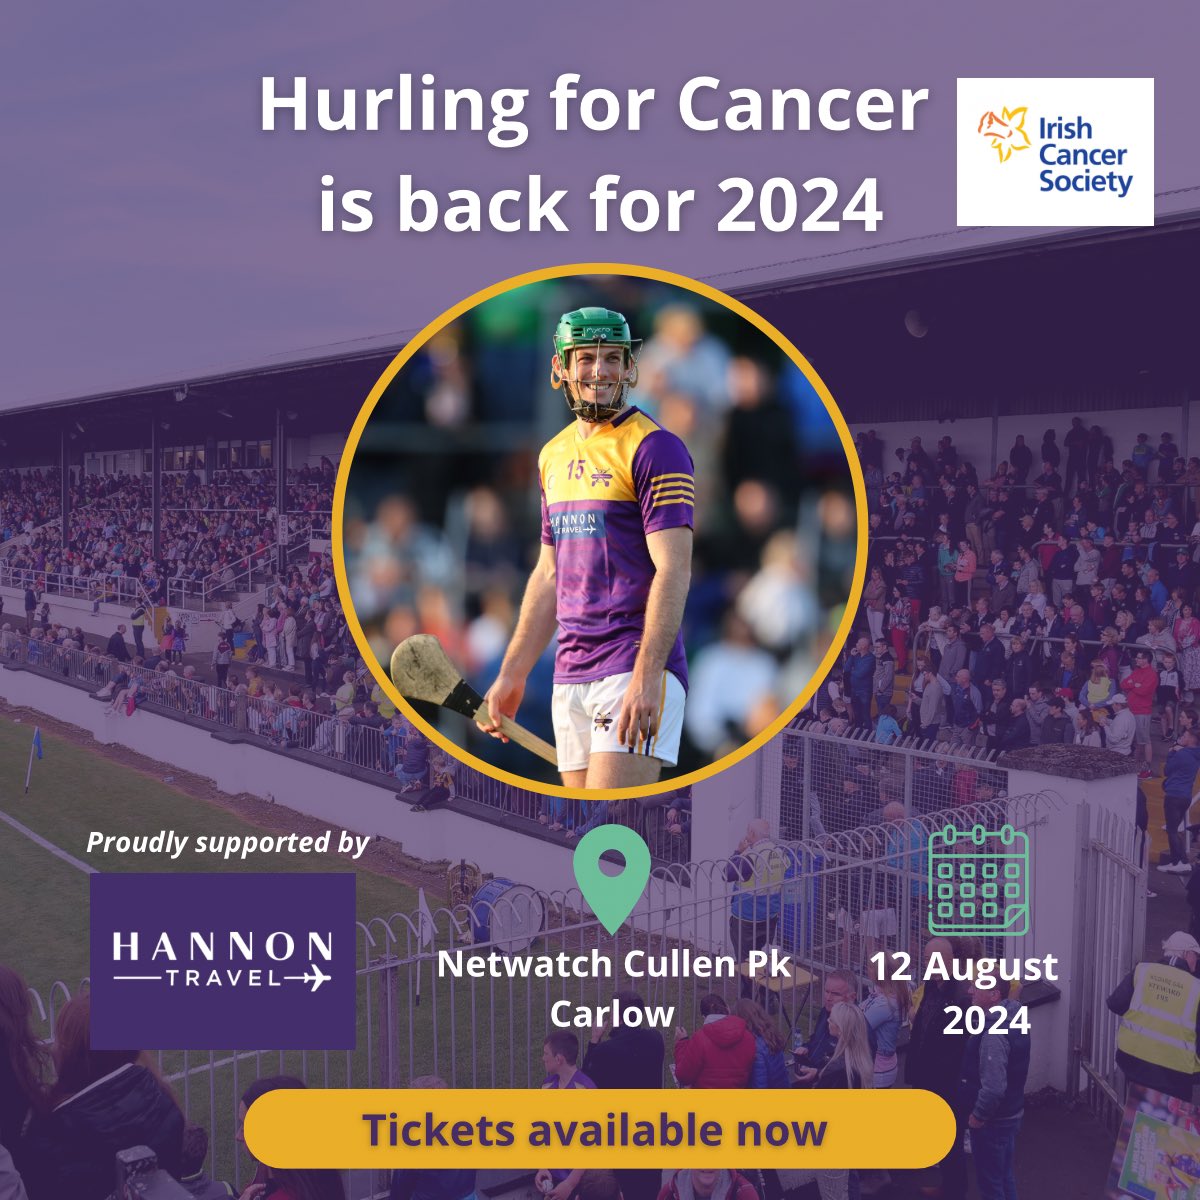 🎗 A reminder that @Hurling4cancer is back for 2024, in aid of @IrishCancerSoc cancer research. We’re excited to be once again supporting this event here at @HannonTravel. When: 12 Aug, 7pm. Where: Netwatch Cullen Park Carlow. Tickets here idonate.ie/event/hurlingf… #hurling4cancer